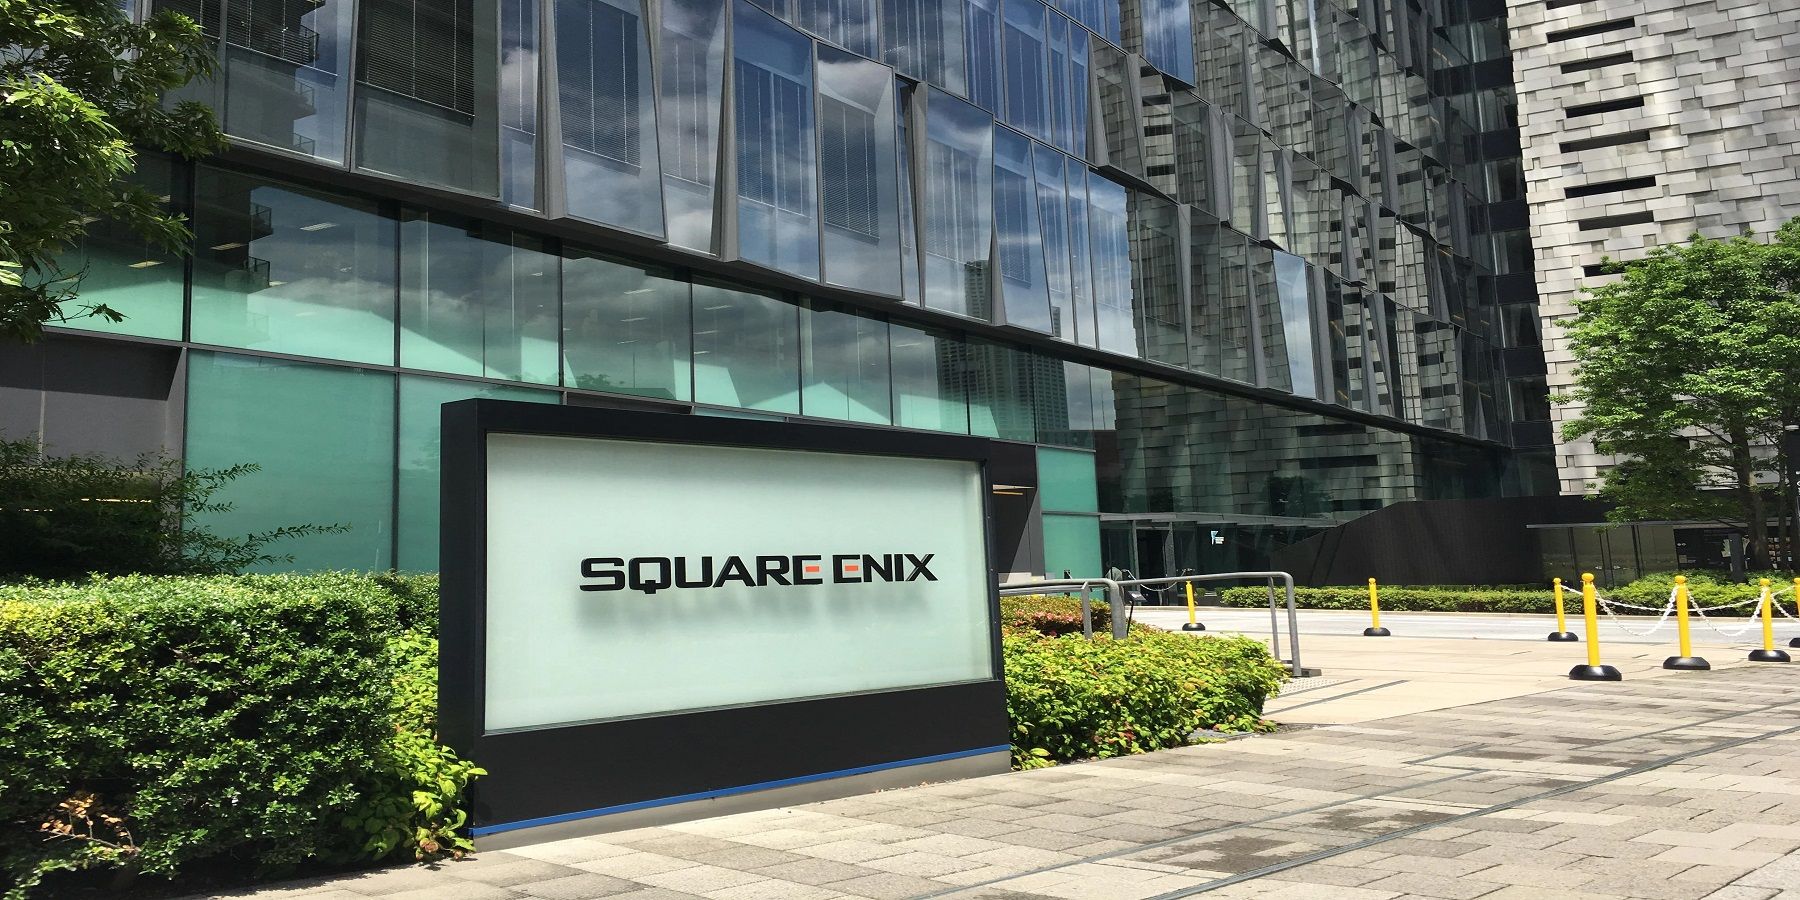 Square-Enix Headquarters, The headquarters for one of the w…